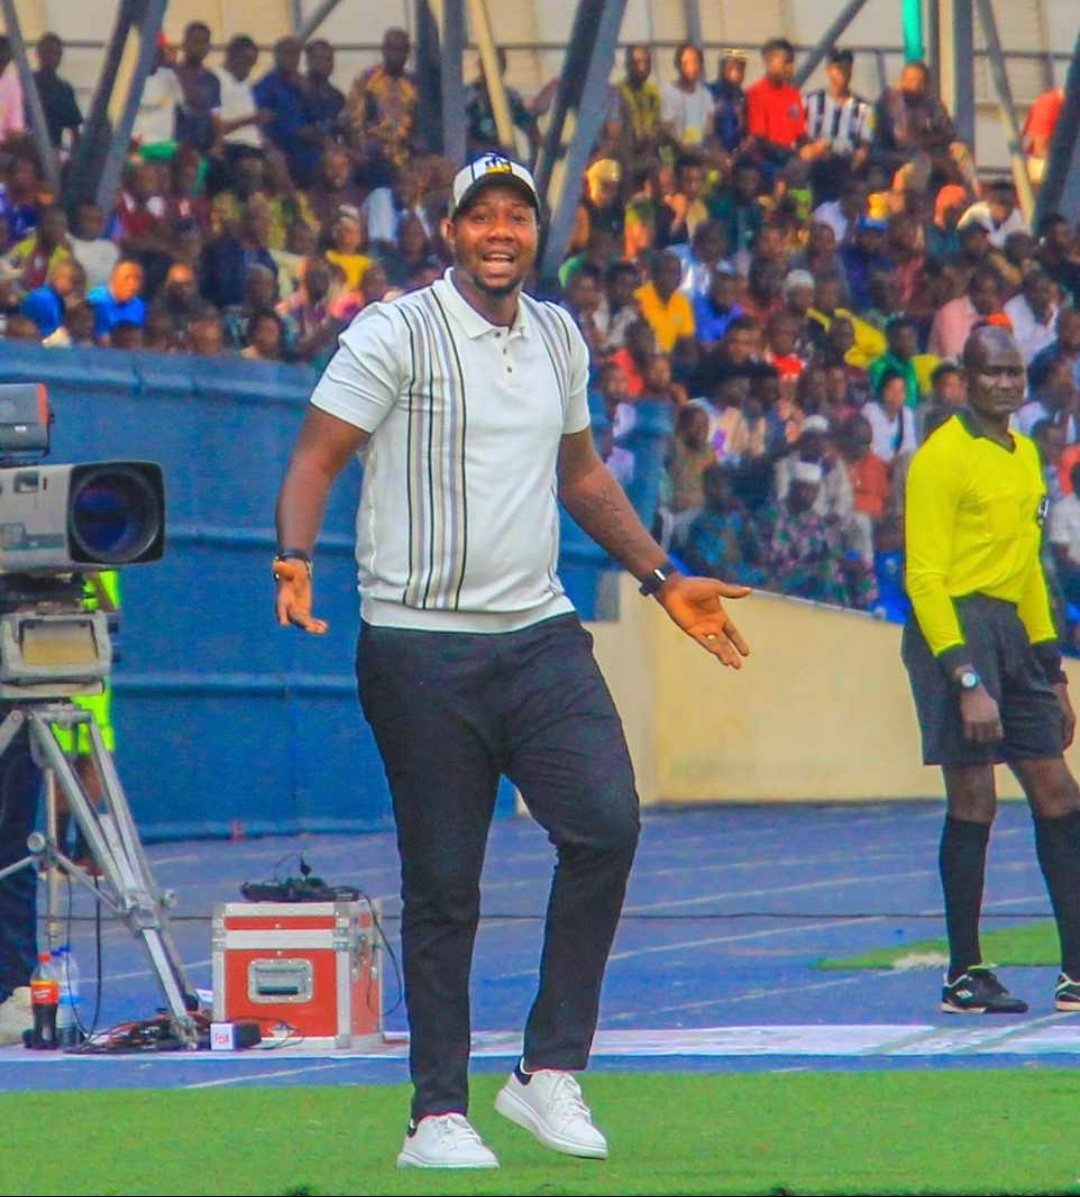 Happy Birthday to our COACH and Enyimba assistant coach @yemastarcoach. 

We celebrate you on this day and may the good Lord bless you abundantly. Cheers to more 🙌  🎉🎉🎊🎊